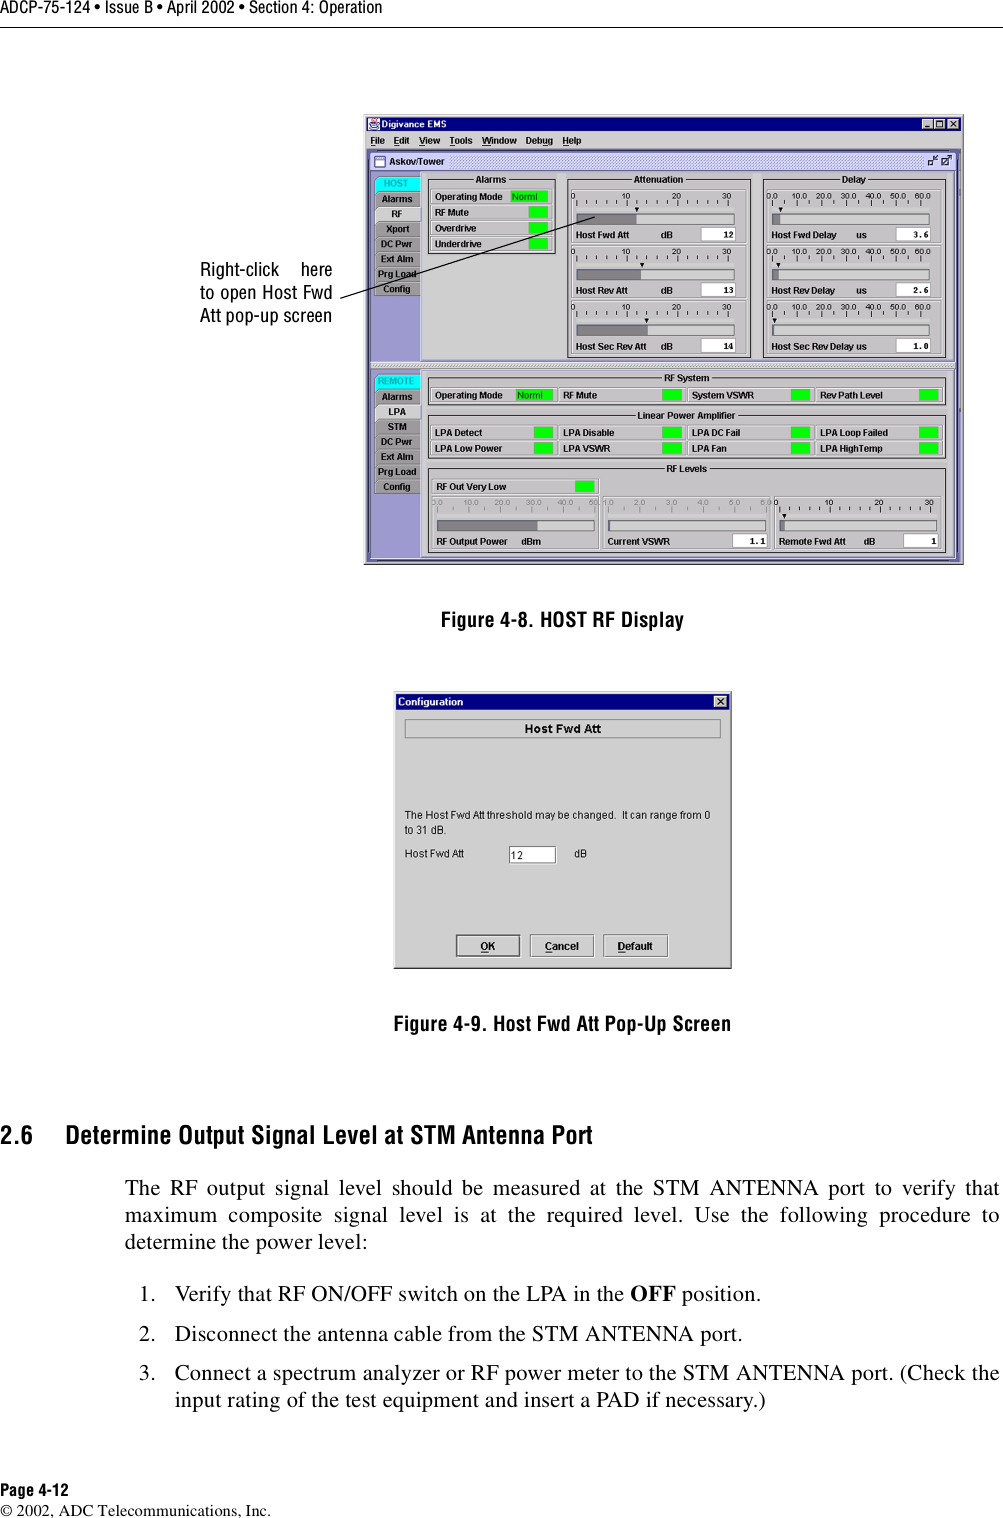 ADCP-75-124 • Issue B • April 2002 • Section 4: OperationPage 4-12©2002, ADC Telecommunications, Inc.Figure 4-8. HOST RF DisplayFigure 4-9. Host Fwd Att Pop-Up Screen2.6 Determine Output Signal Level at STM Antenna PortThe RF output signal level should be measured at the STM ANTENNA port to verify thatmaximum composite signal level is at the required level. Use the following procedure todetermine the power level:1. Verify that RF ON/OFF switch on the LPA in the OFF position.2. Disconnect the antenna cable from the STM ANTENNA port.3. Connect aspectrum analyzer or RF power meter to the STM ANTENNA port. (Check theinput rating of the test equipment and insert aPAD if necessary.)Right-click hereto open Host FwdAtt pop-up screen